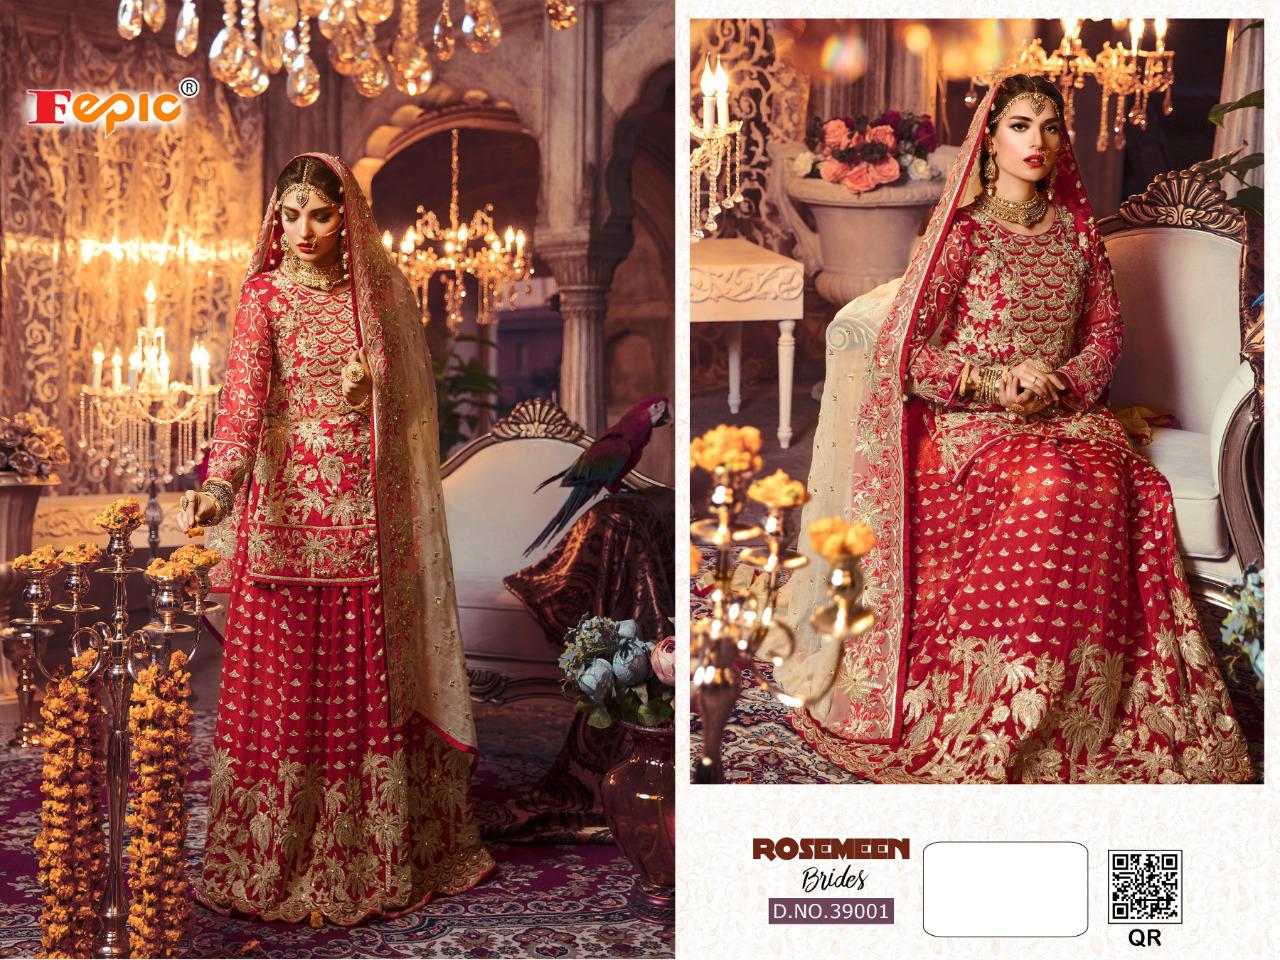 Fepic Present Rosemeen Brides Salwar Suits Collection